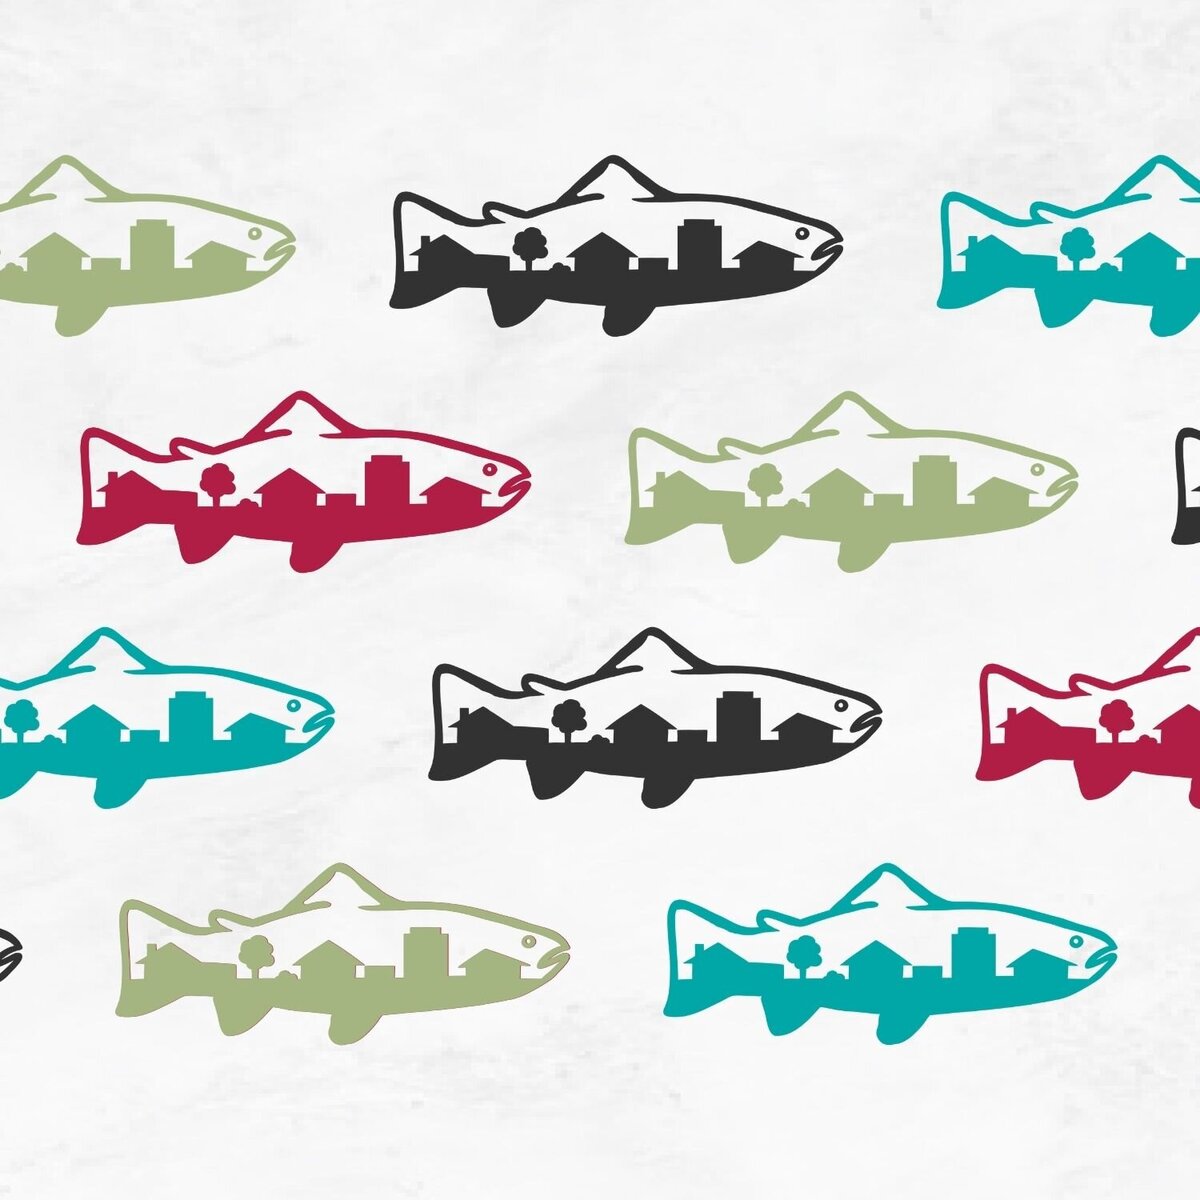 Custom illustrated icon of a neighborhood inside a trout for a personal brand